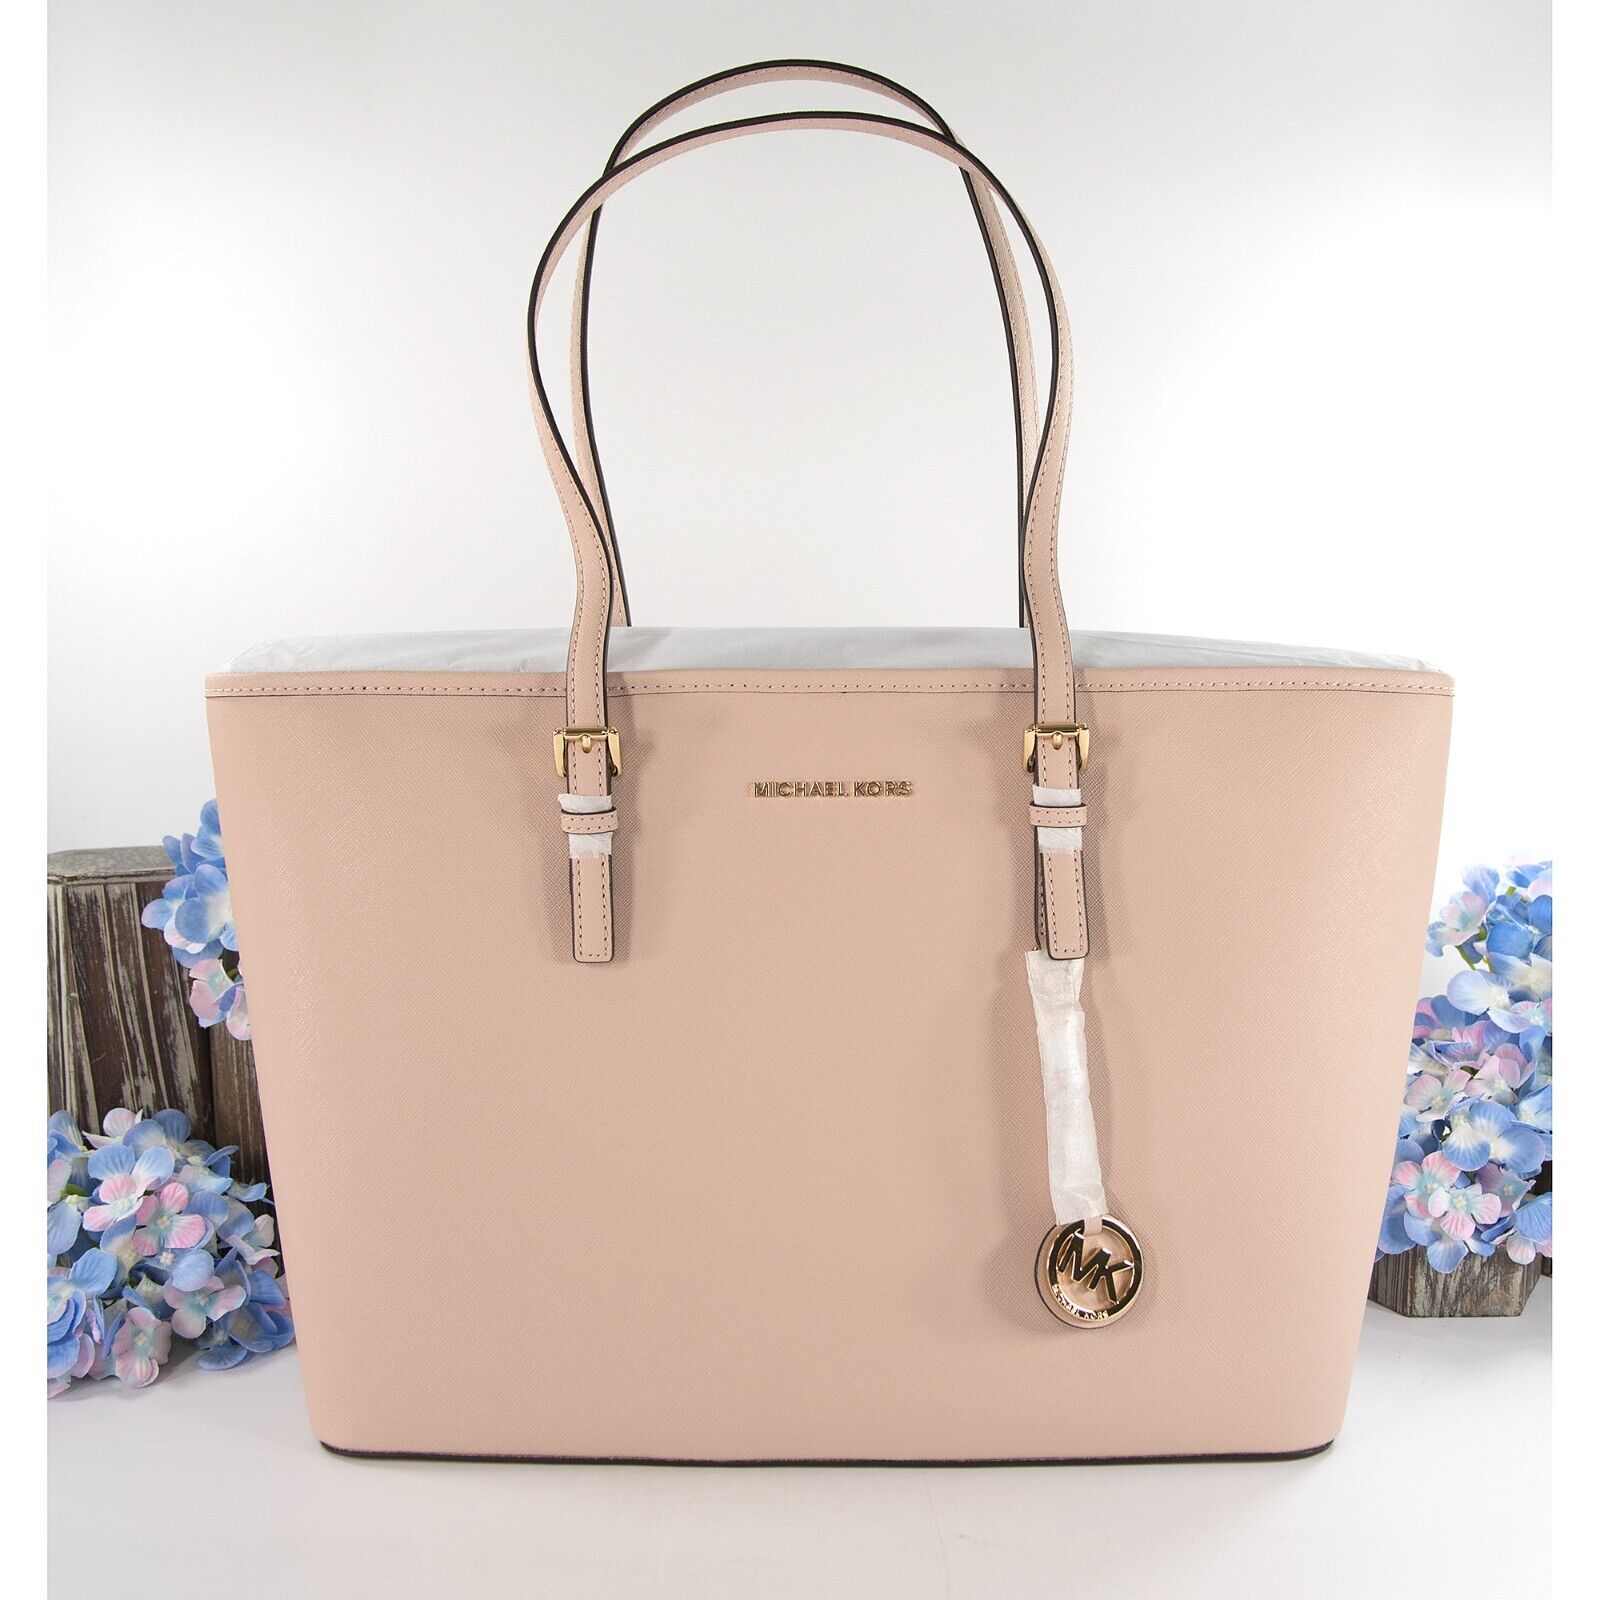 Michael Kors Soft Pink Saffiano Leather Multifunction Travel Tote